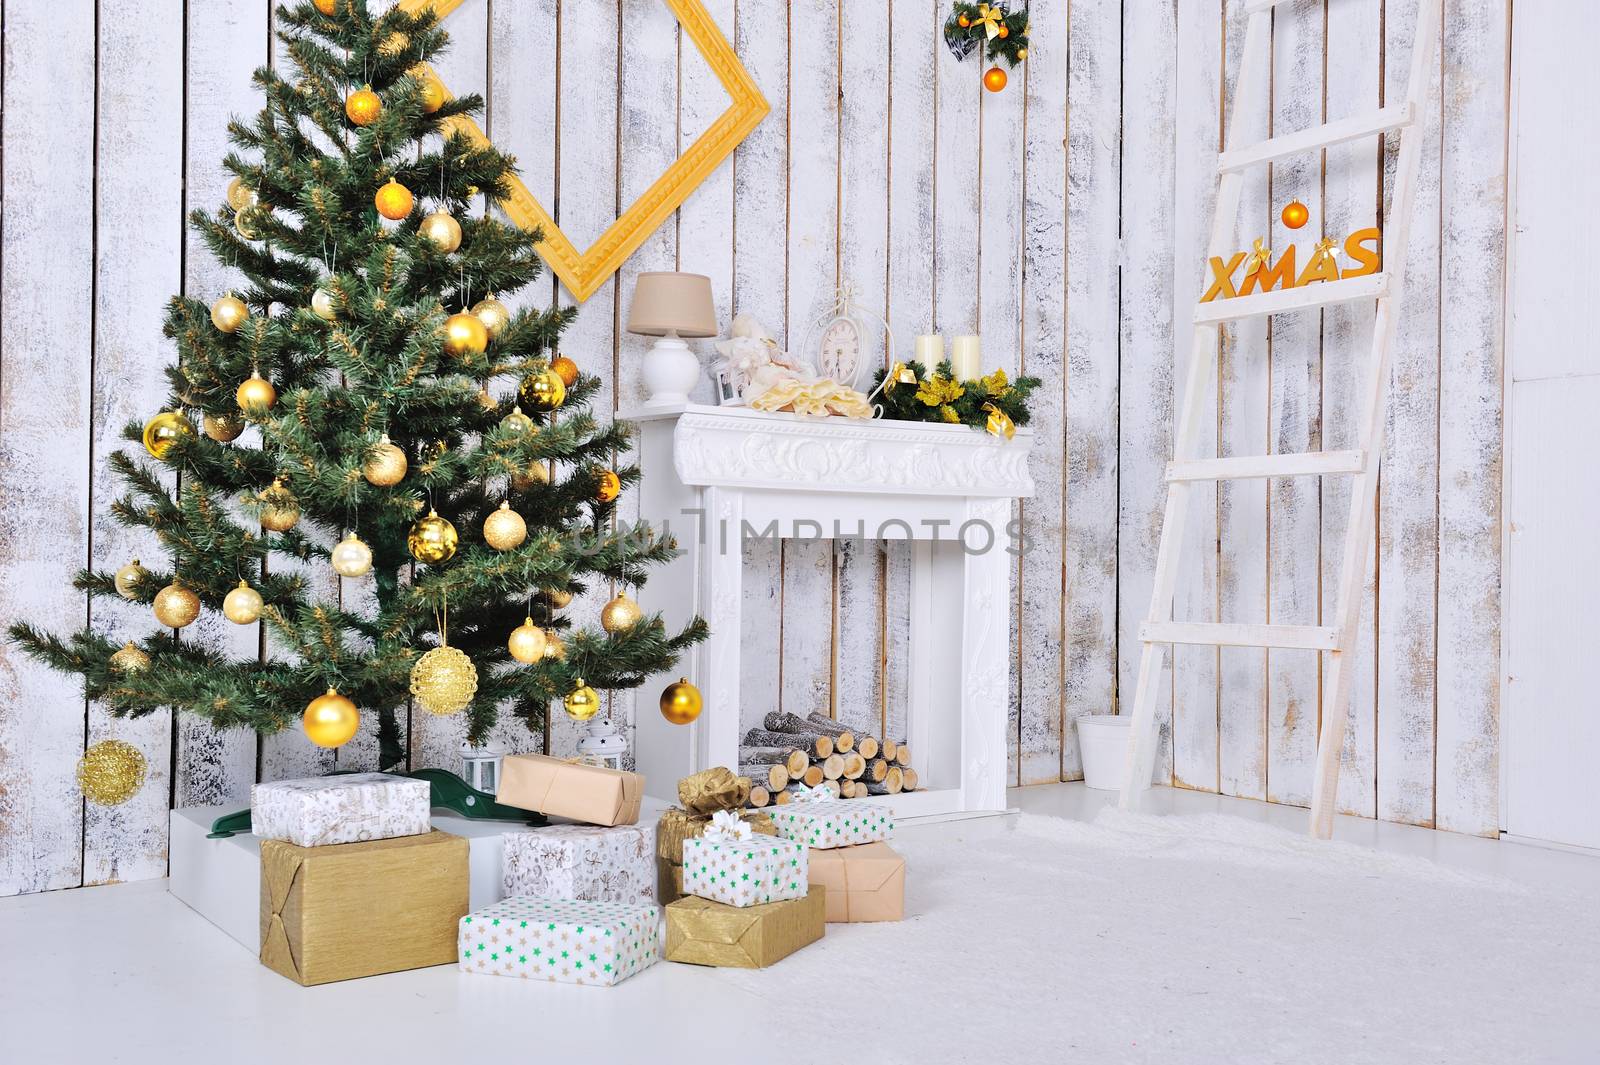 Christmas interior in white and gold color with Christmas tree and gifts